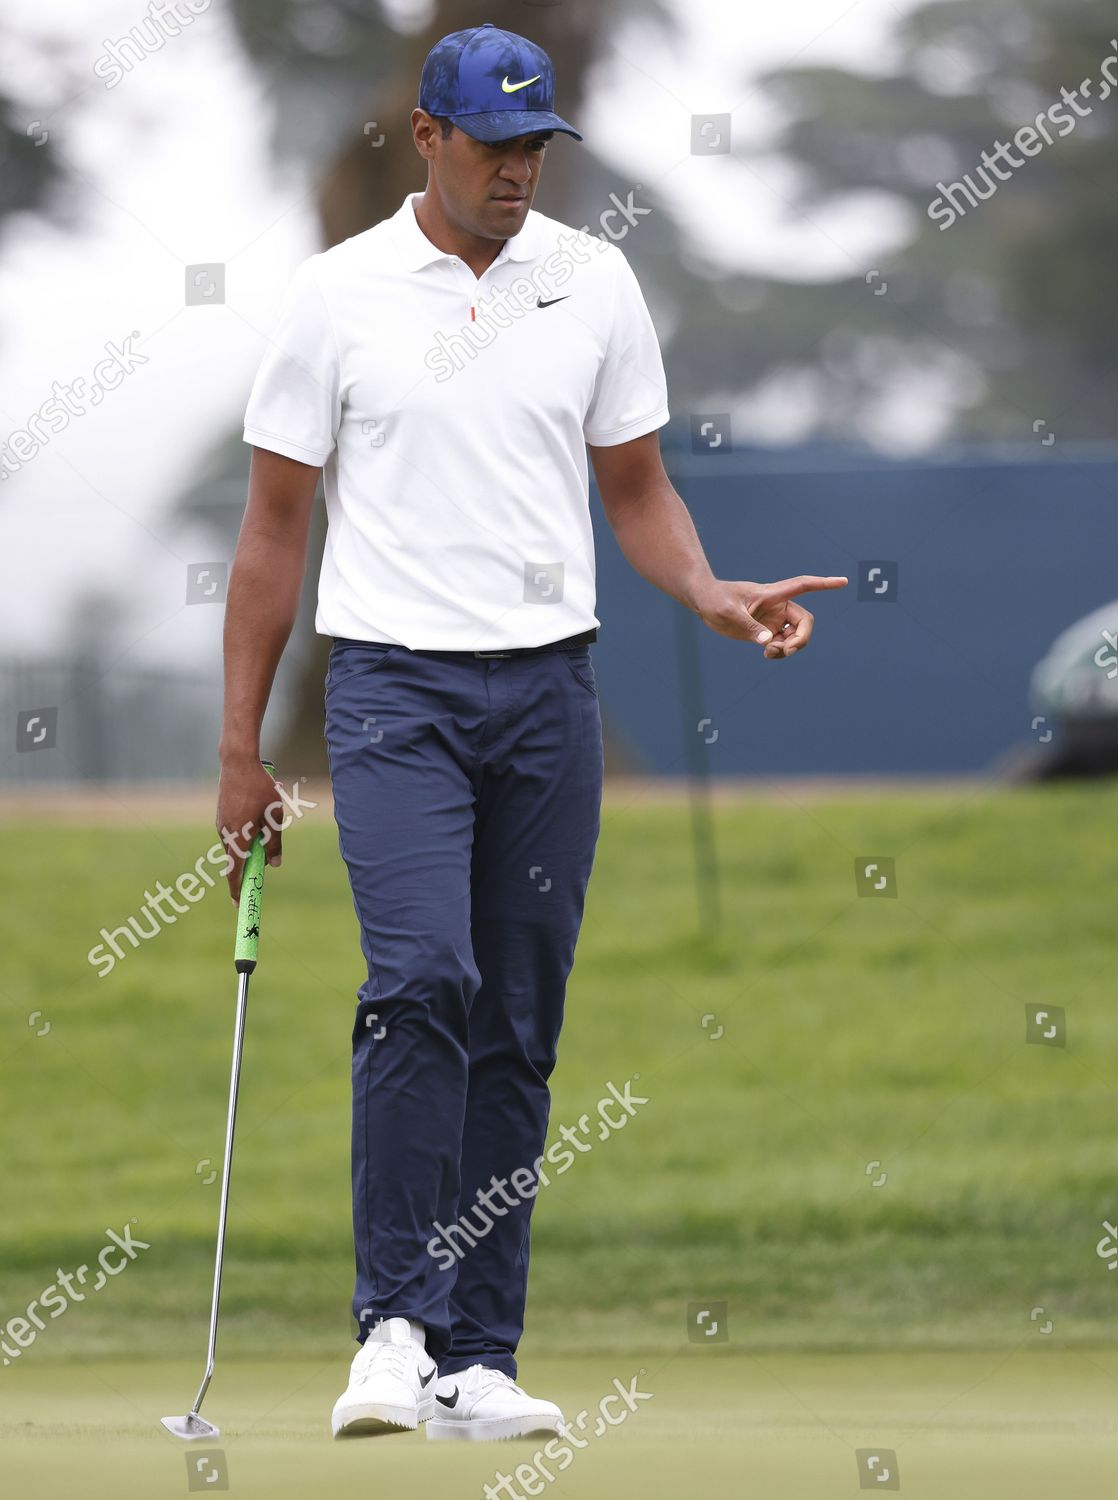 Tony Finau Us Reacts His Putt On Editorial Stock Photo Stock Image Shutterstock